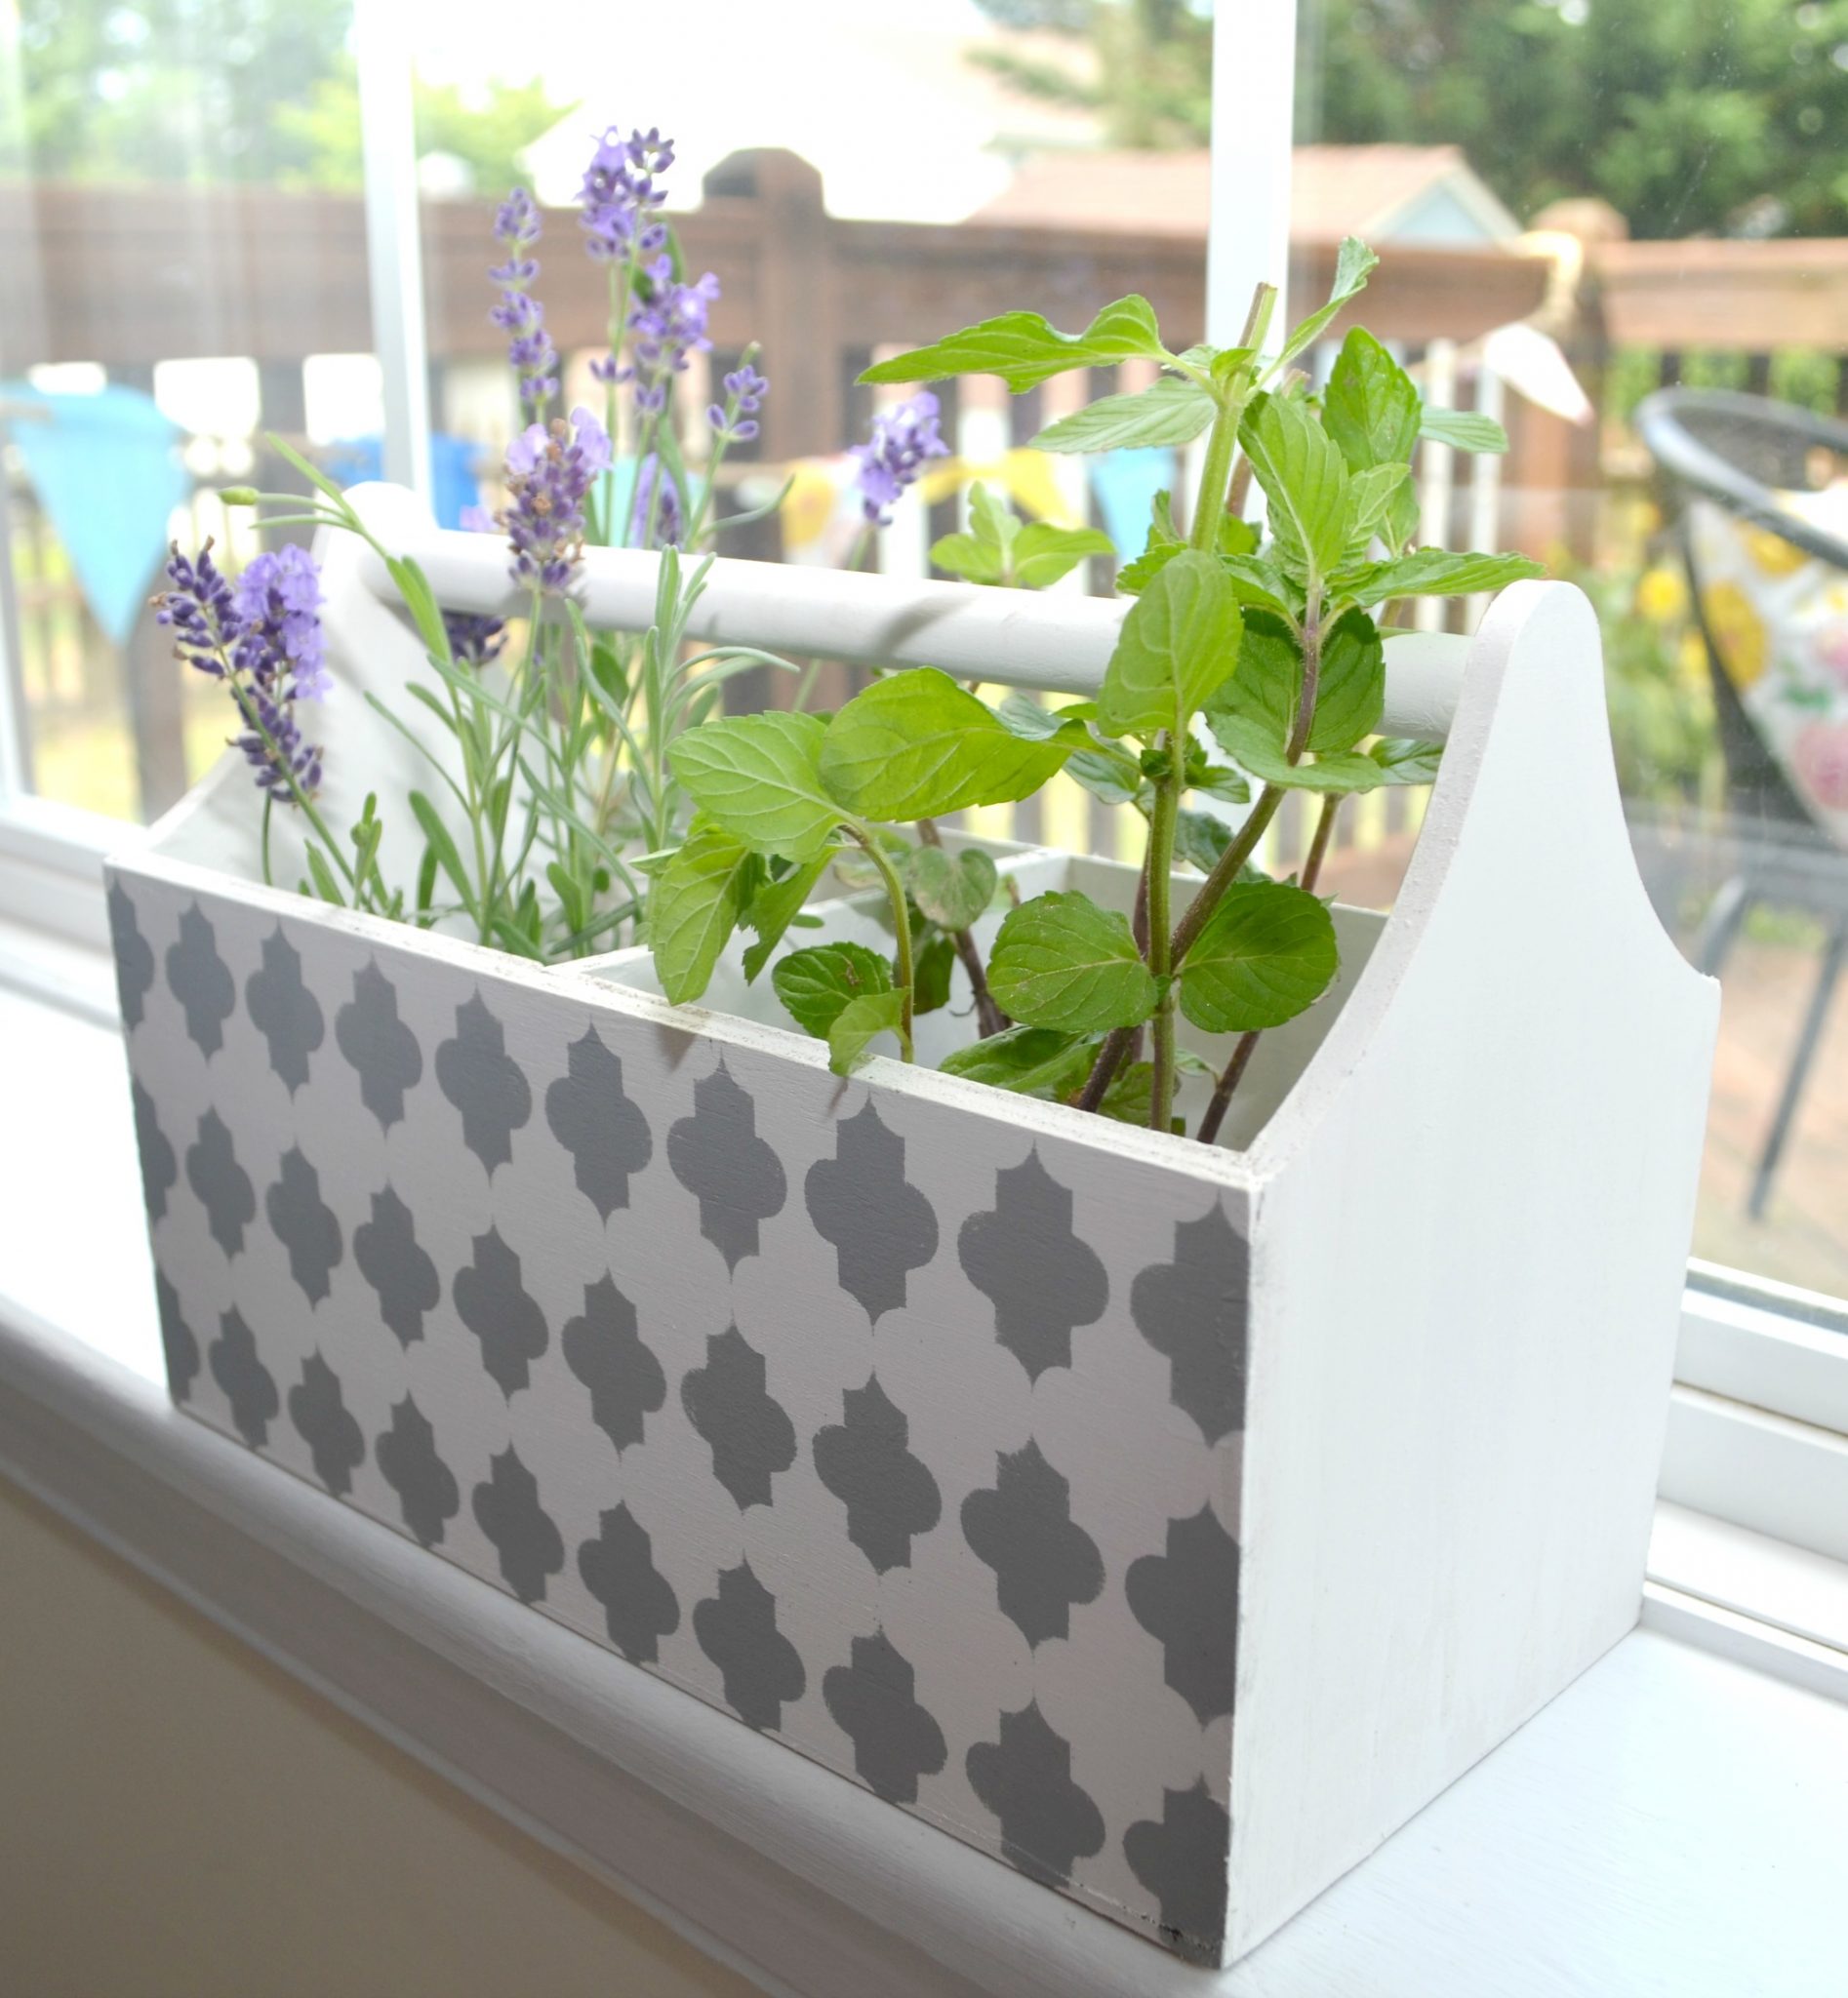 Stenciled Planter for Herbs